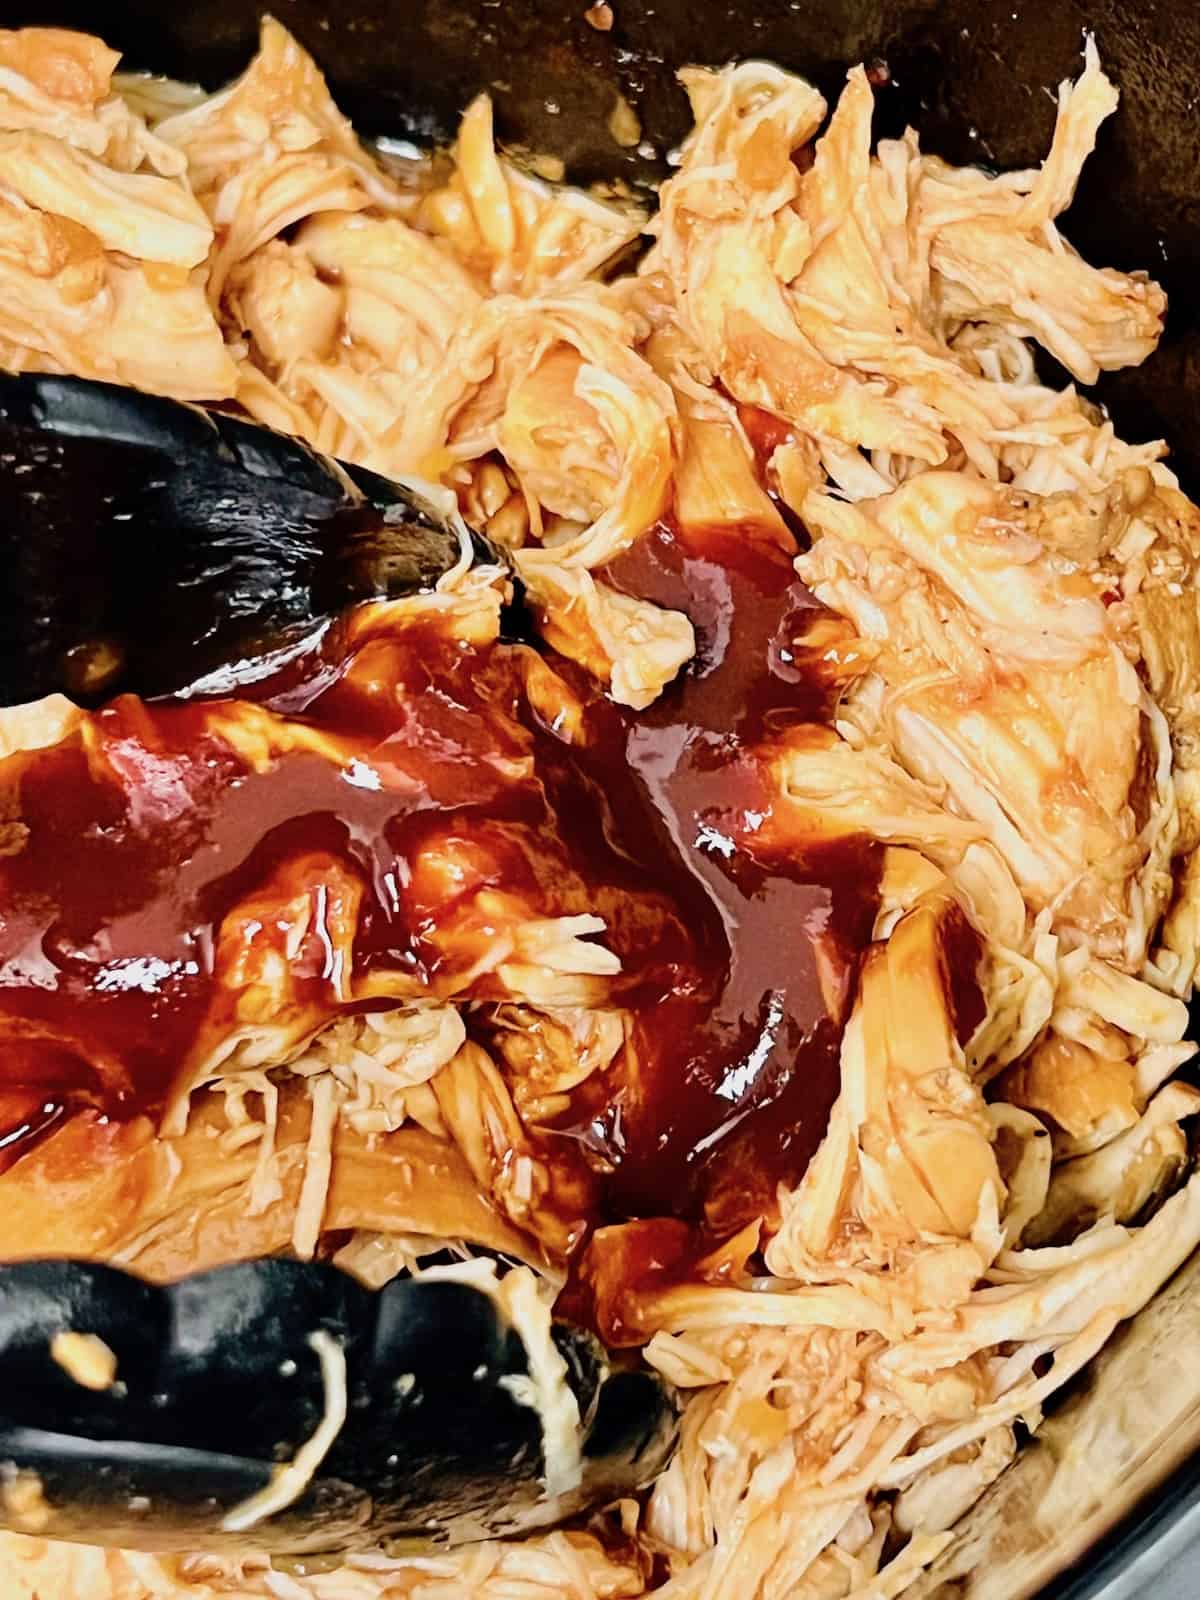 Tongs mixing bbq sauce in with shredded chicken in Crockpot